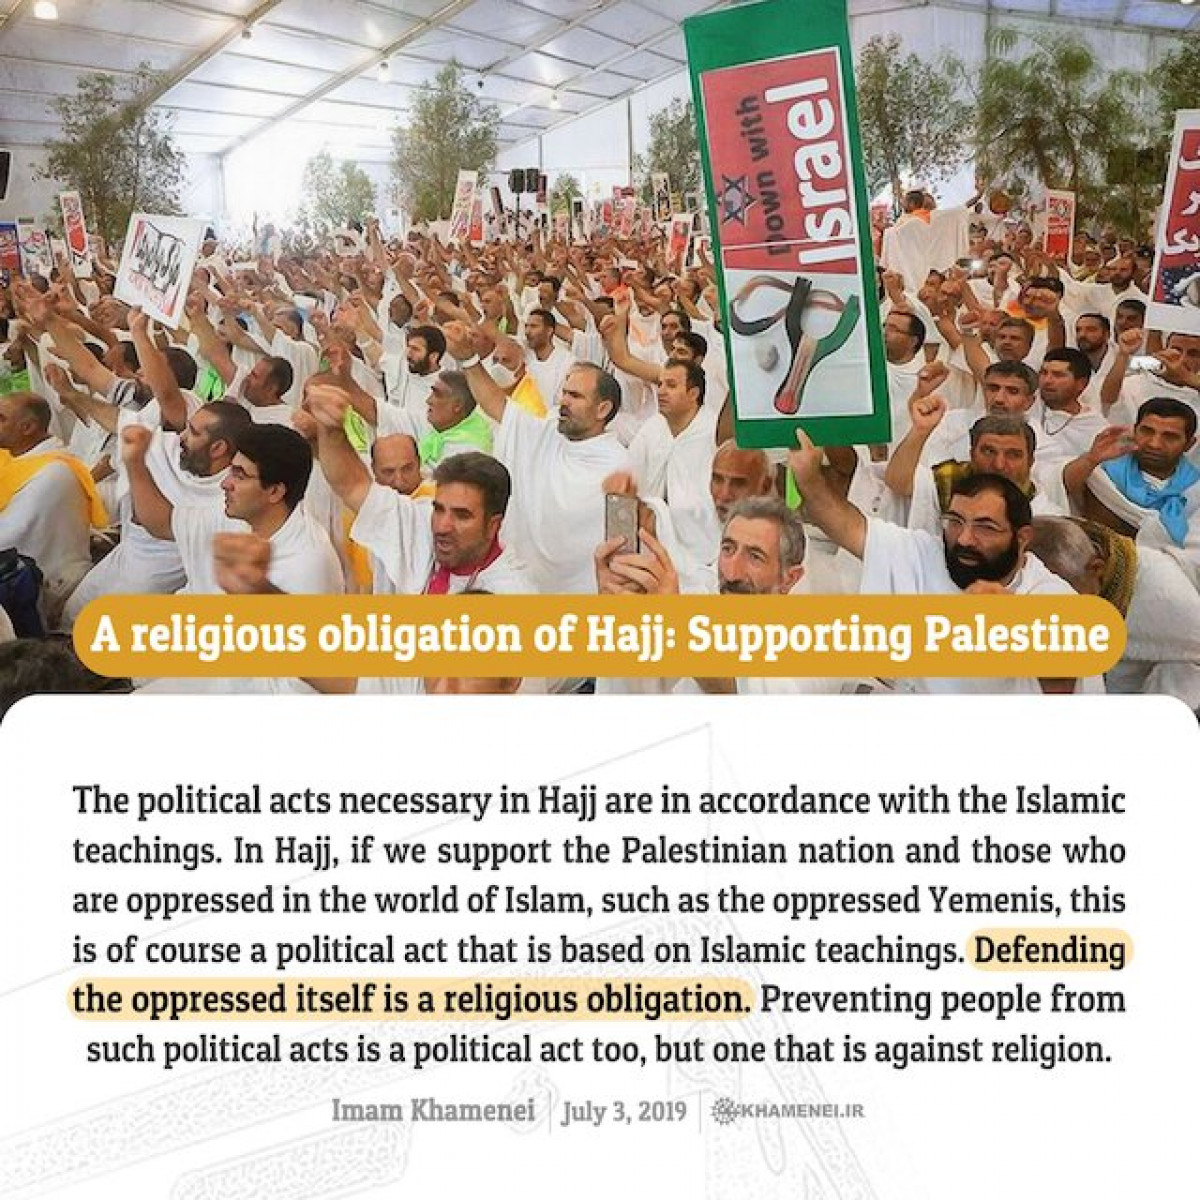 A religious obligation of Hajj: Supporting Palestine